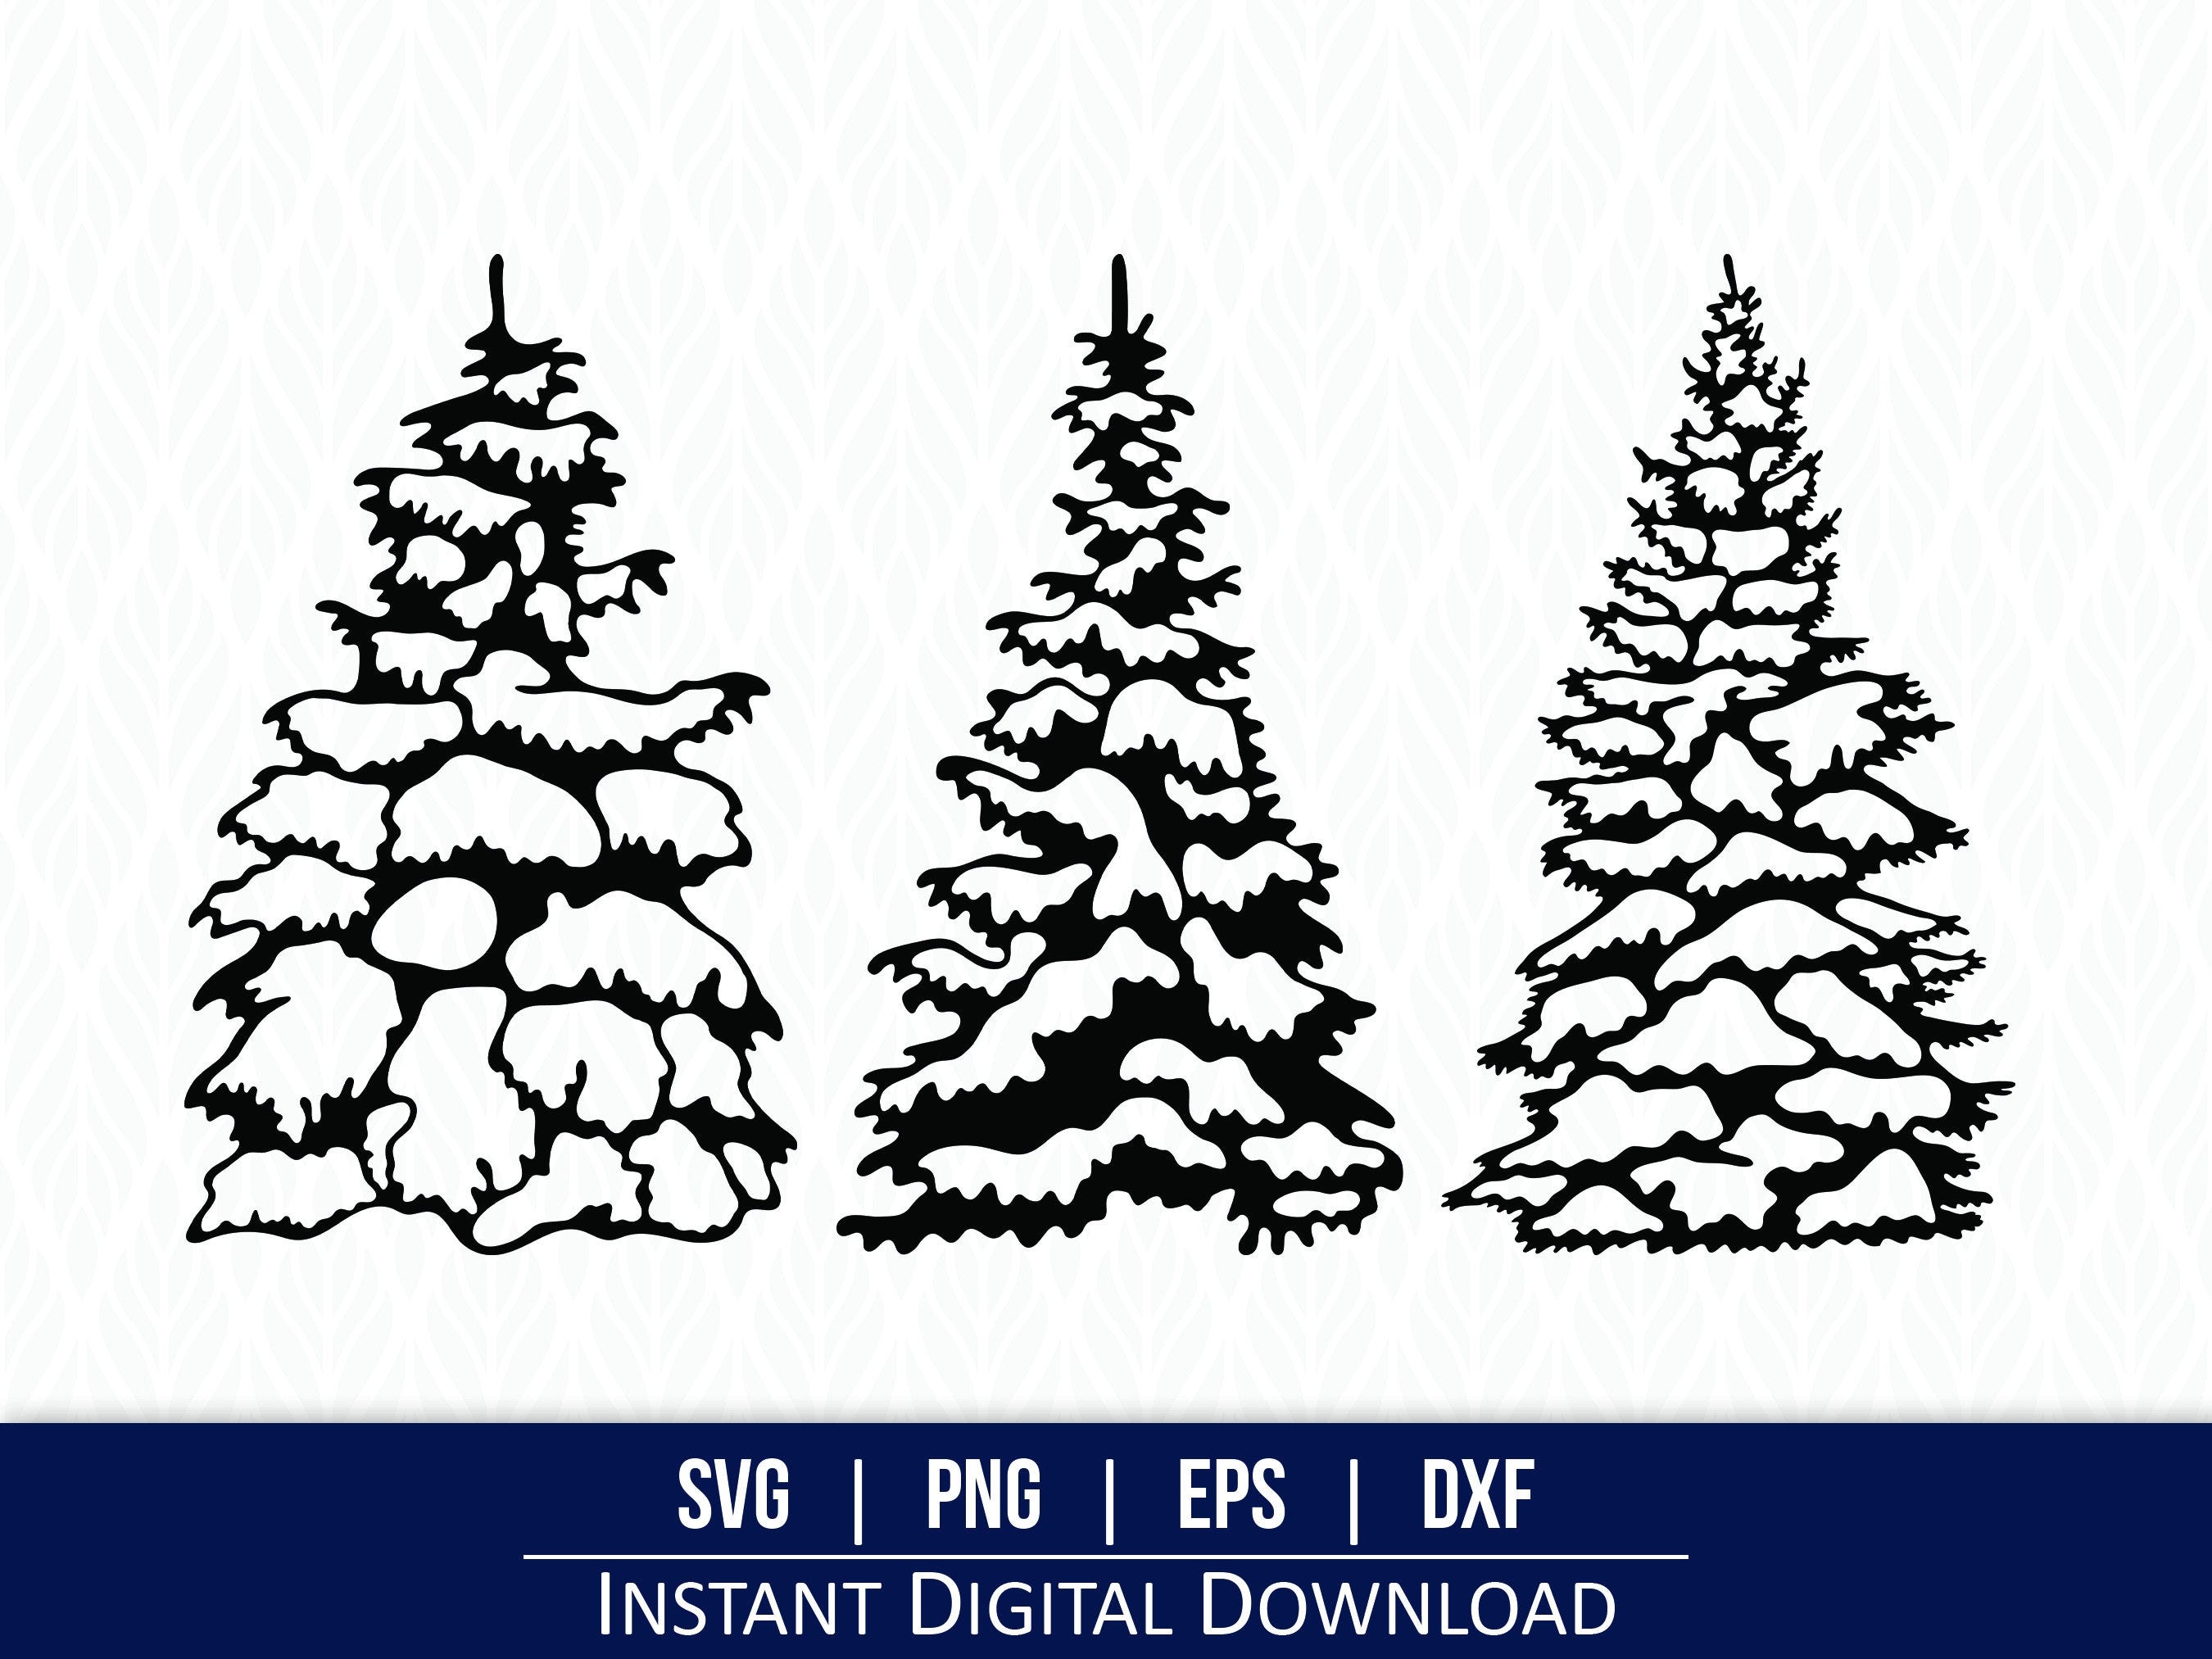 Christmas Tree - Instant Digital Download - svg, png, dxf and eps included!